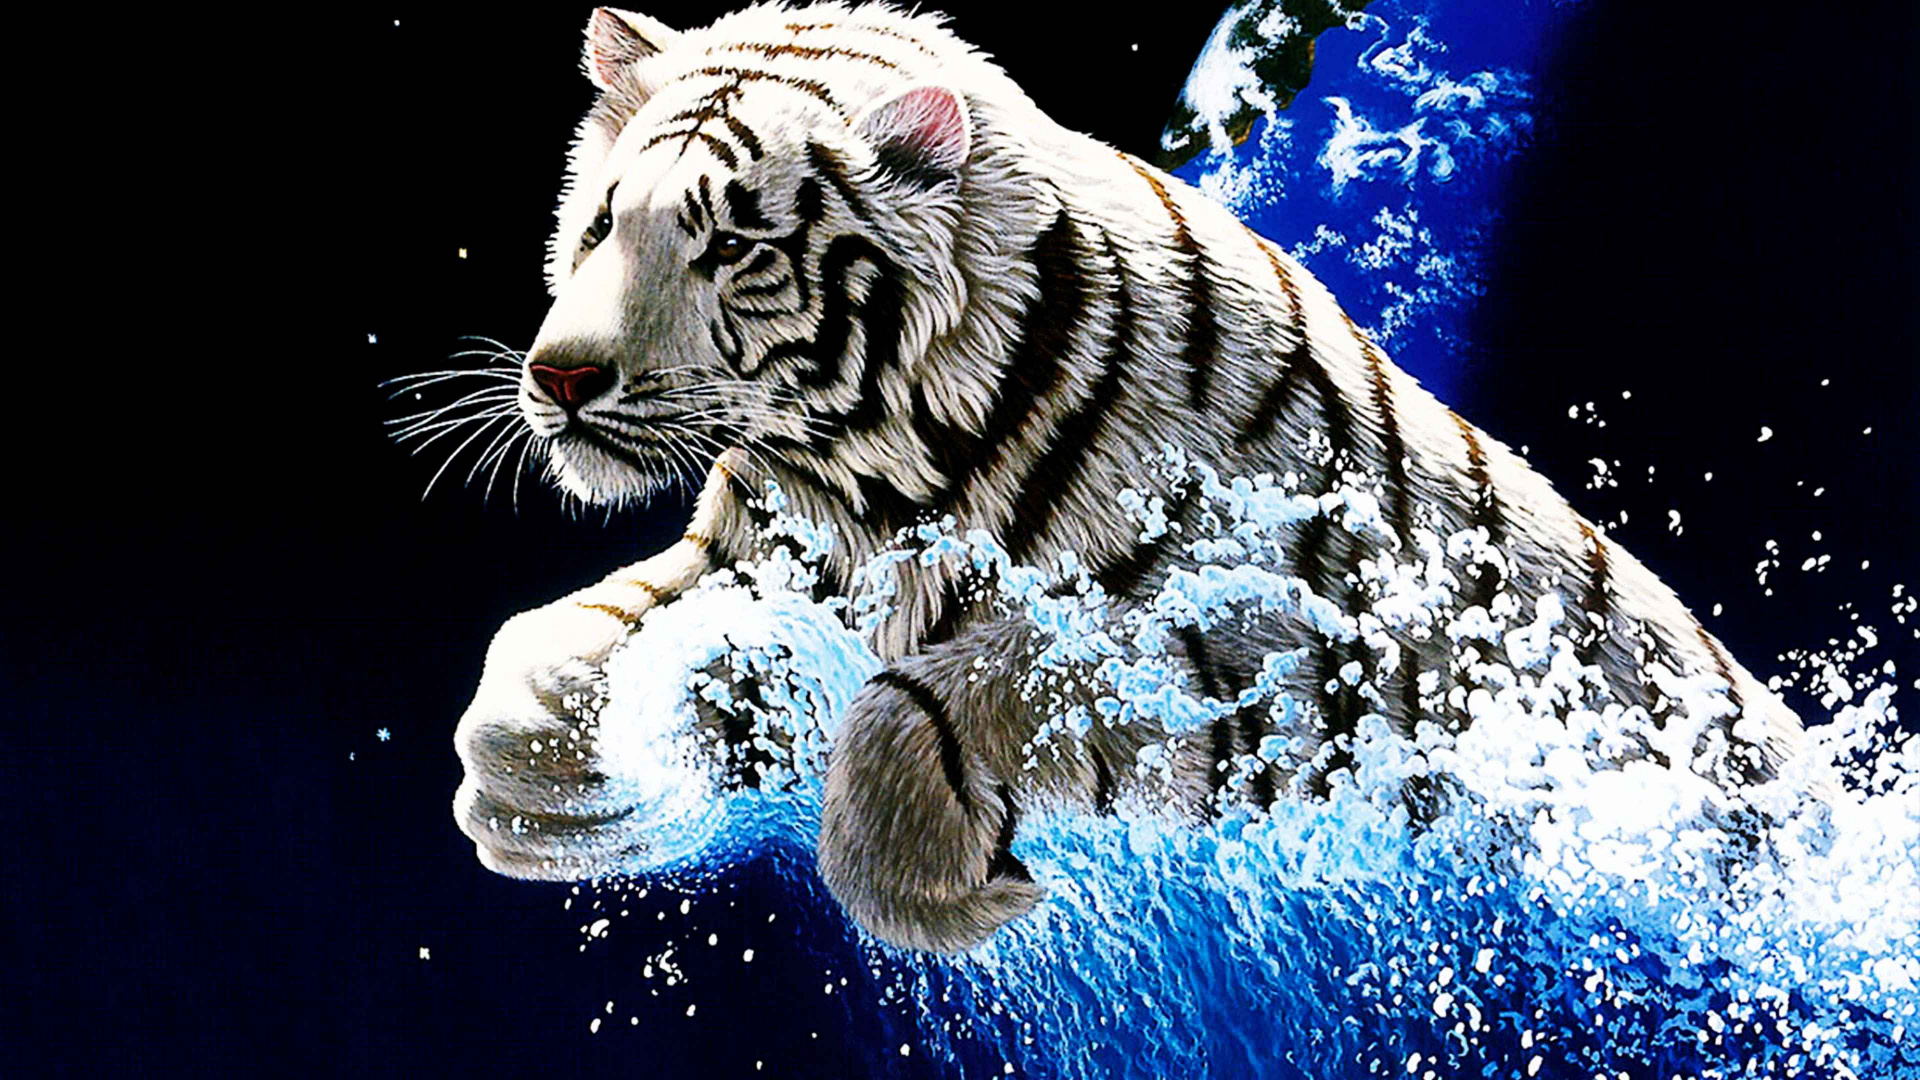 White and Black Tiger in Water. Wallpaper in 1920x1080 Resolution